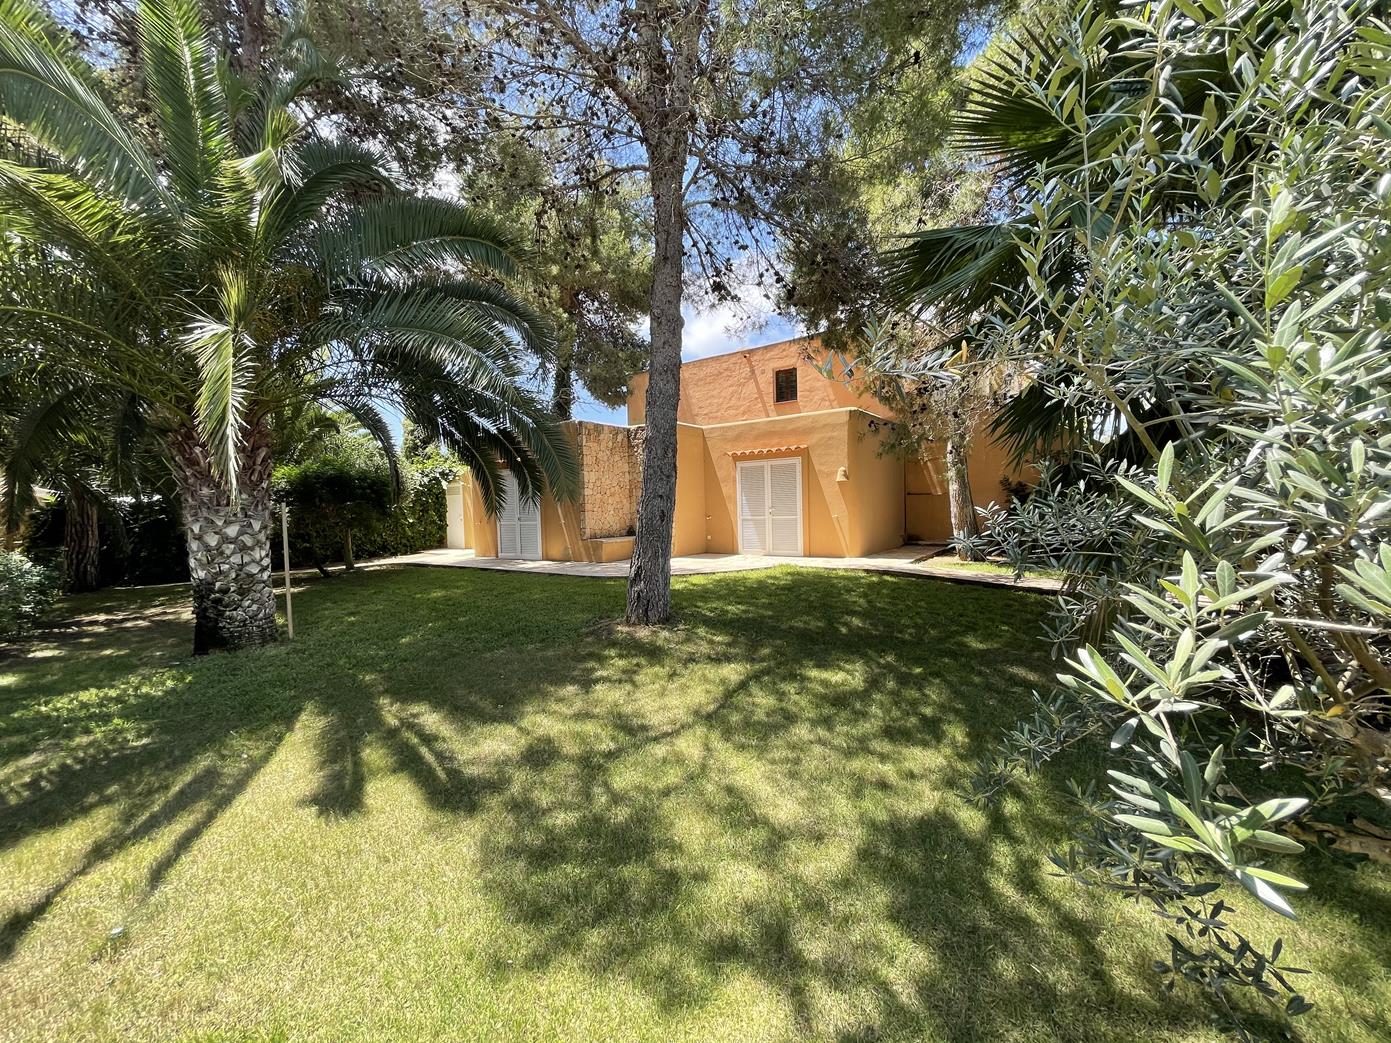 Spacious and beautiful Villa with lots of garden